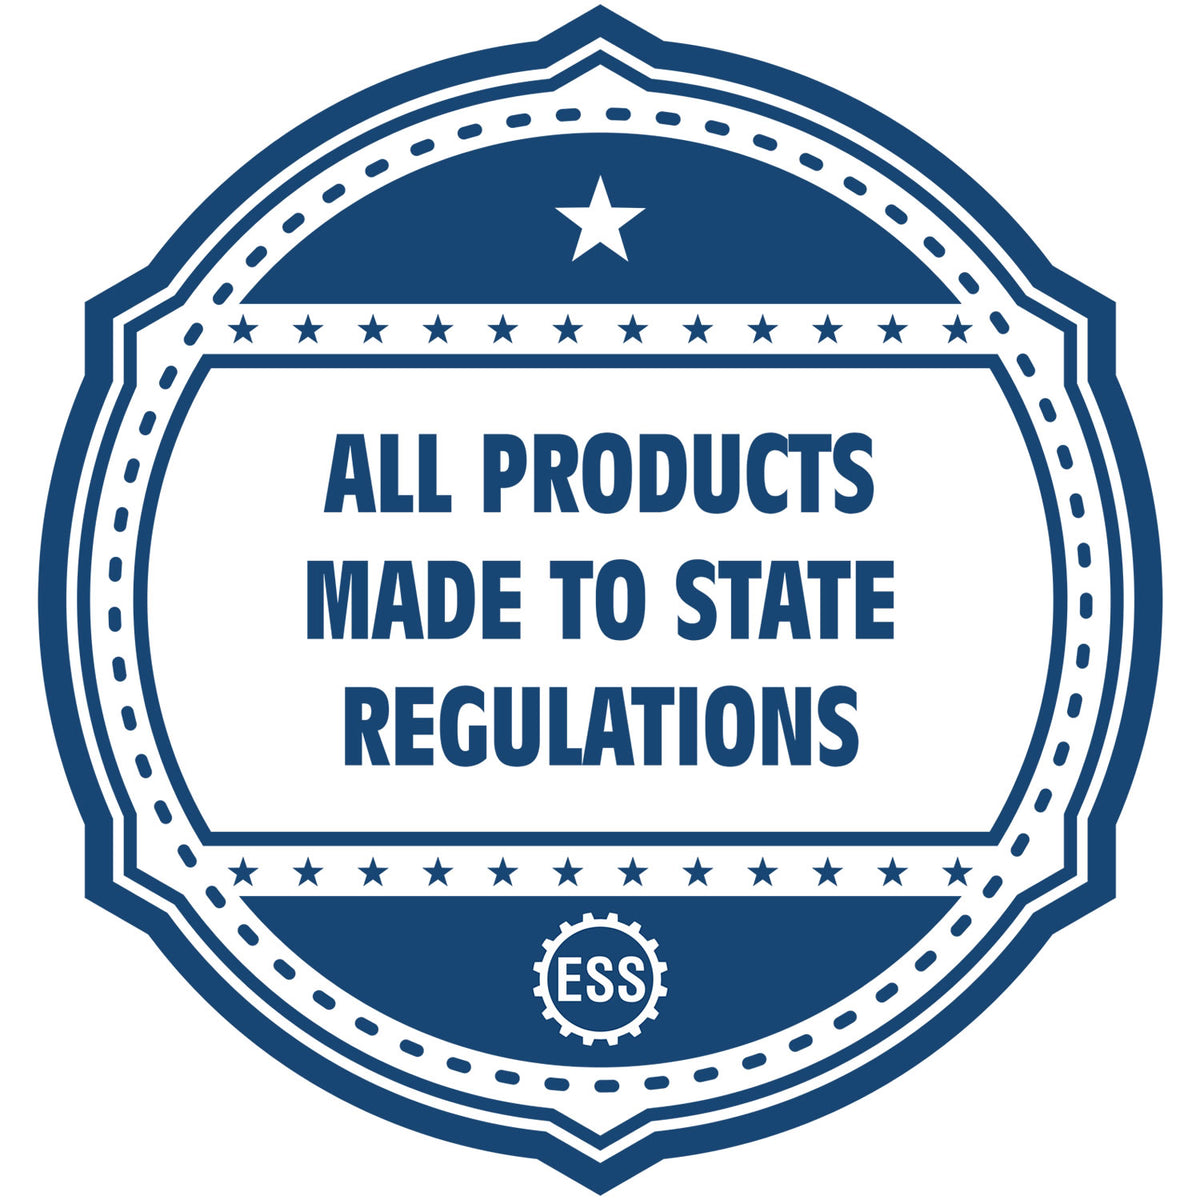 An icon or badge element for the Slim Pre-Inked Connecticut Architect Seal Stamp showing that this product is made in compliance with state regulations.